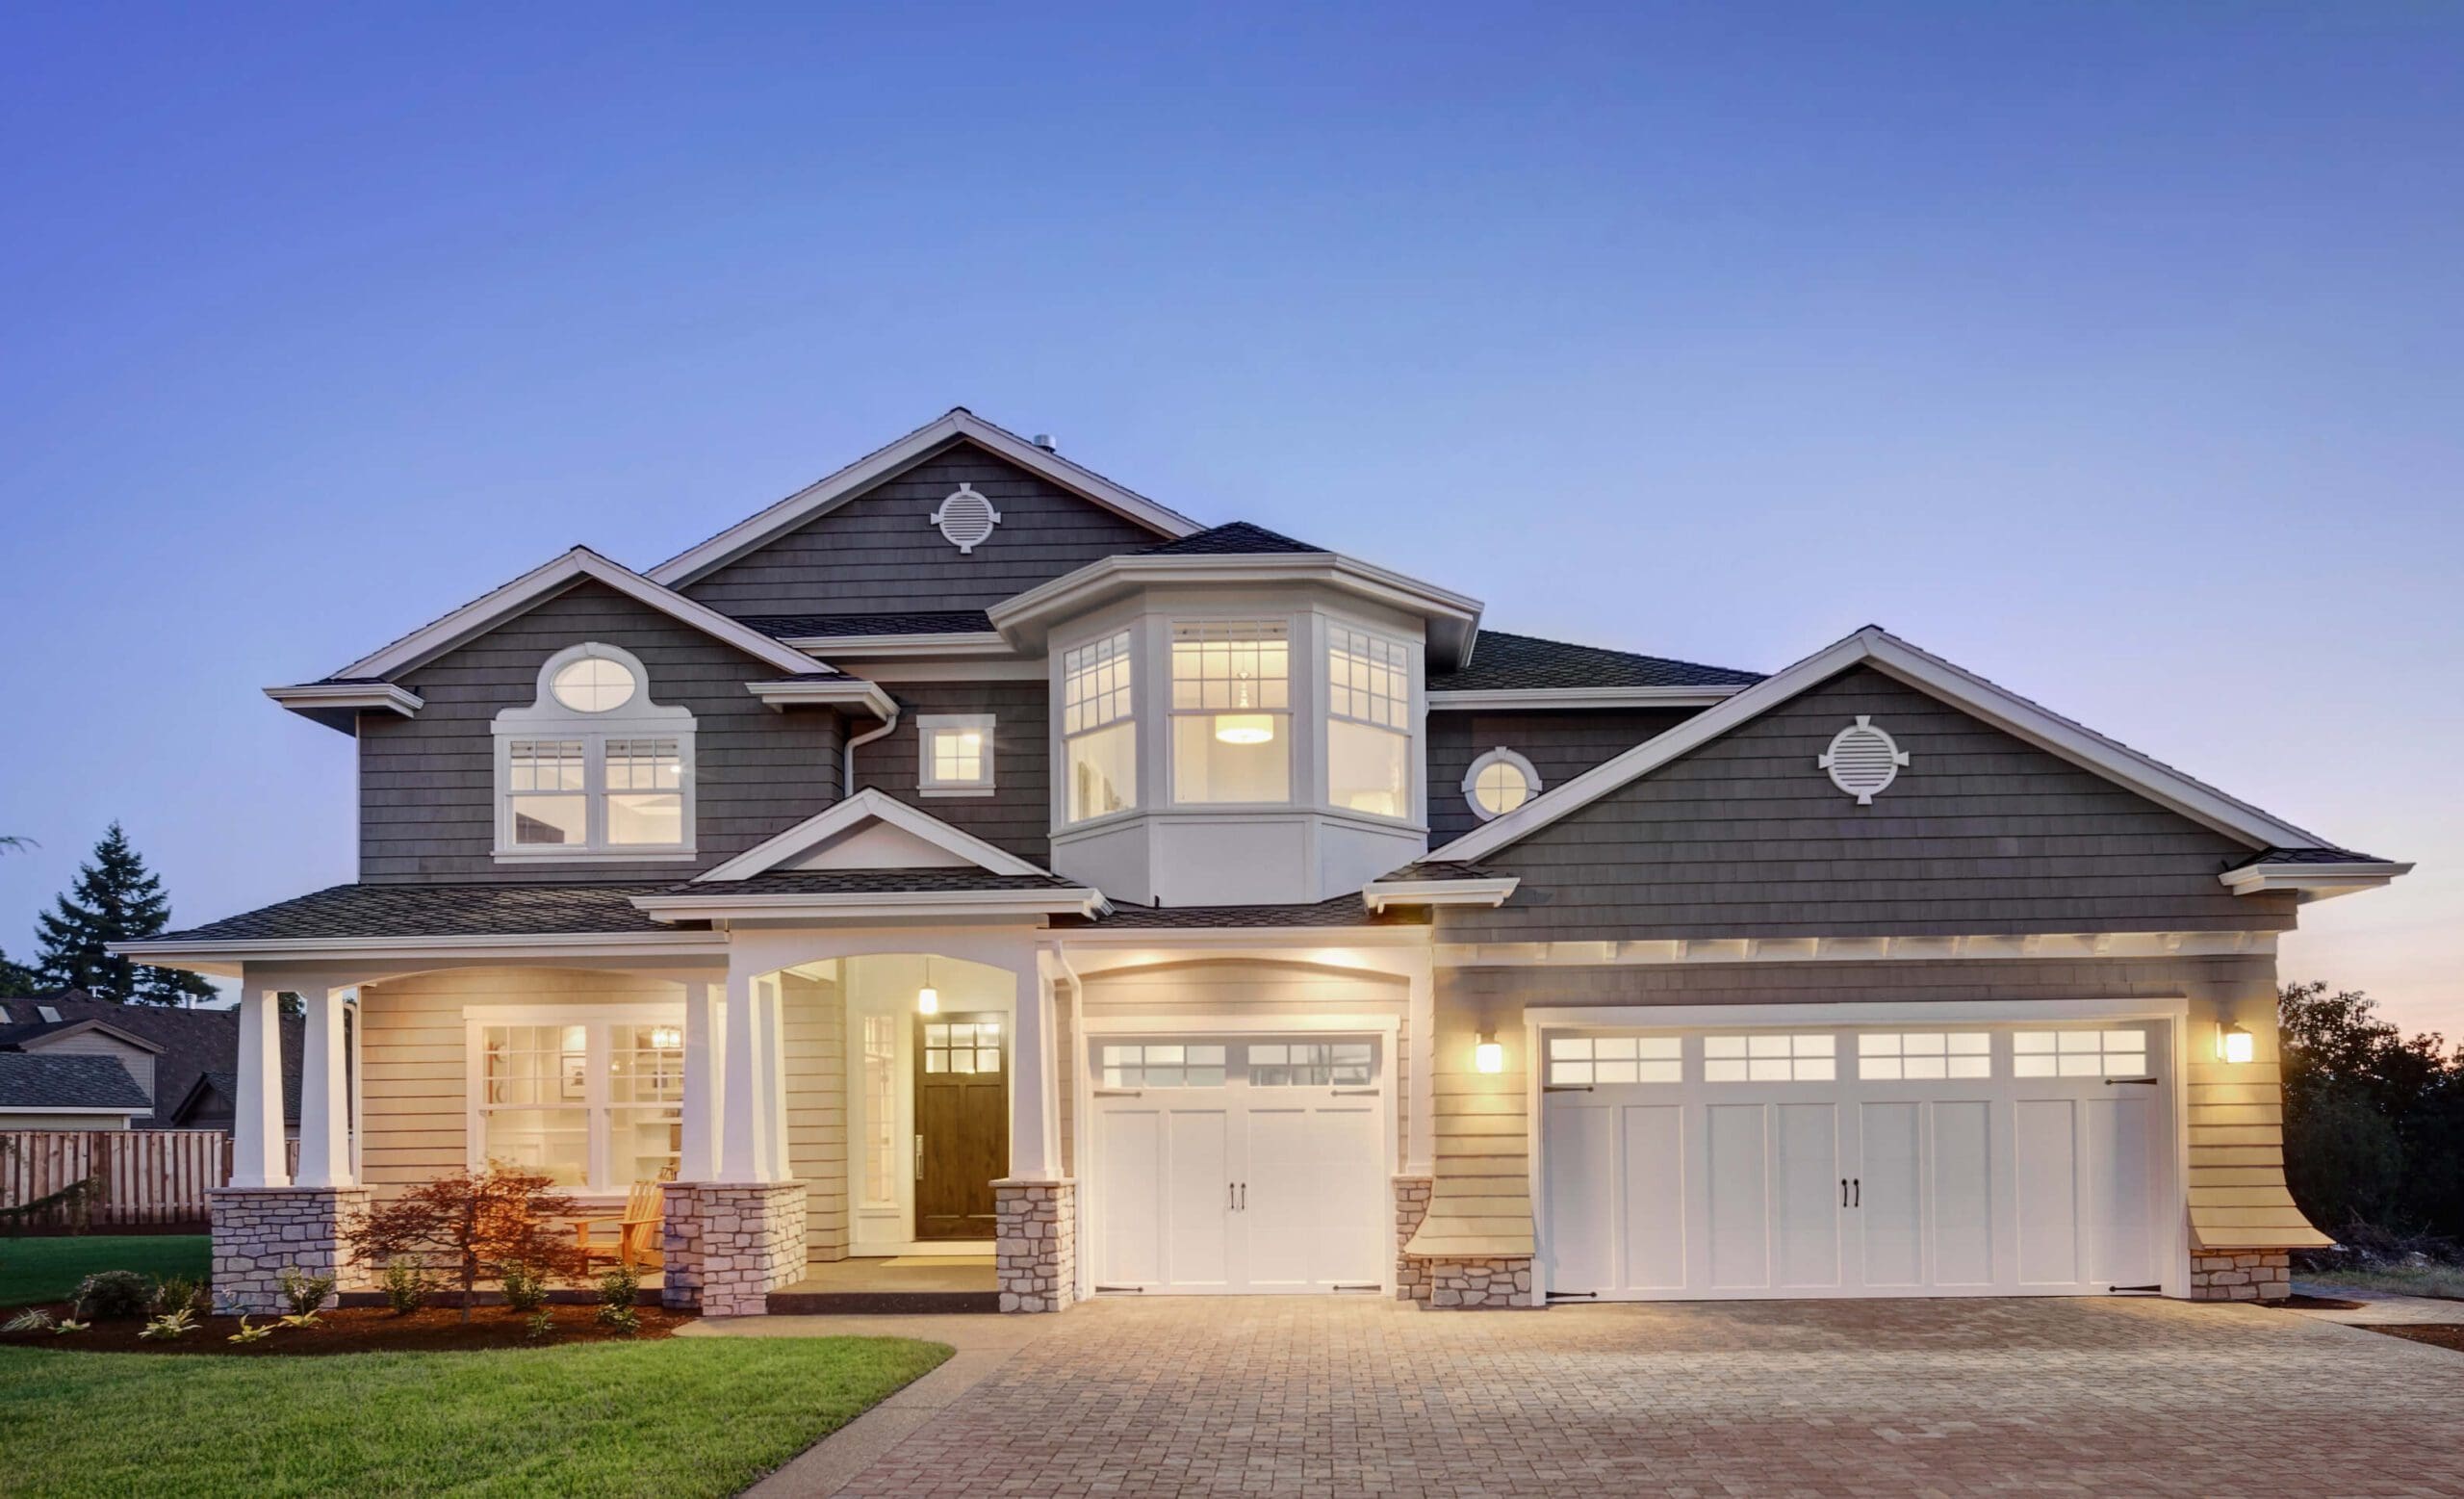 A brightly lit home with a large garage